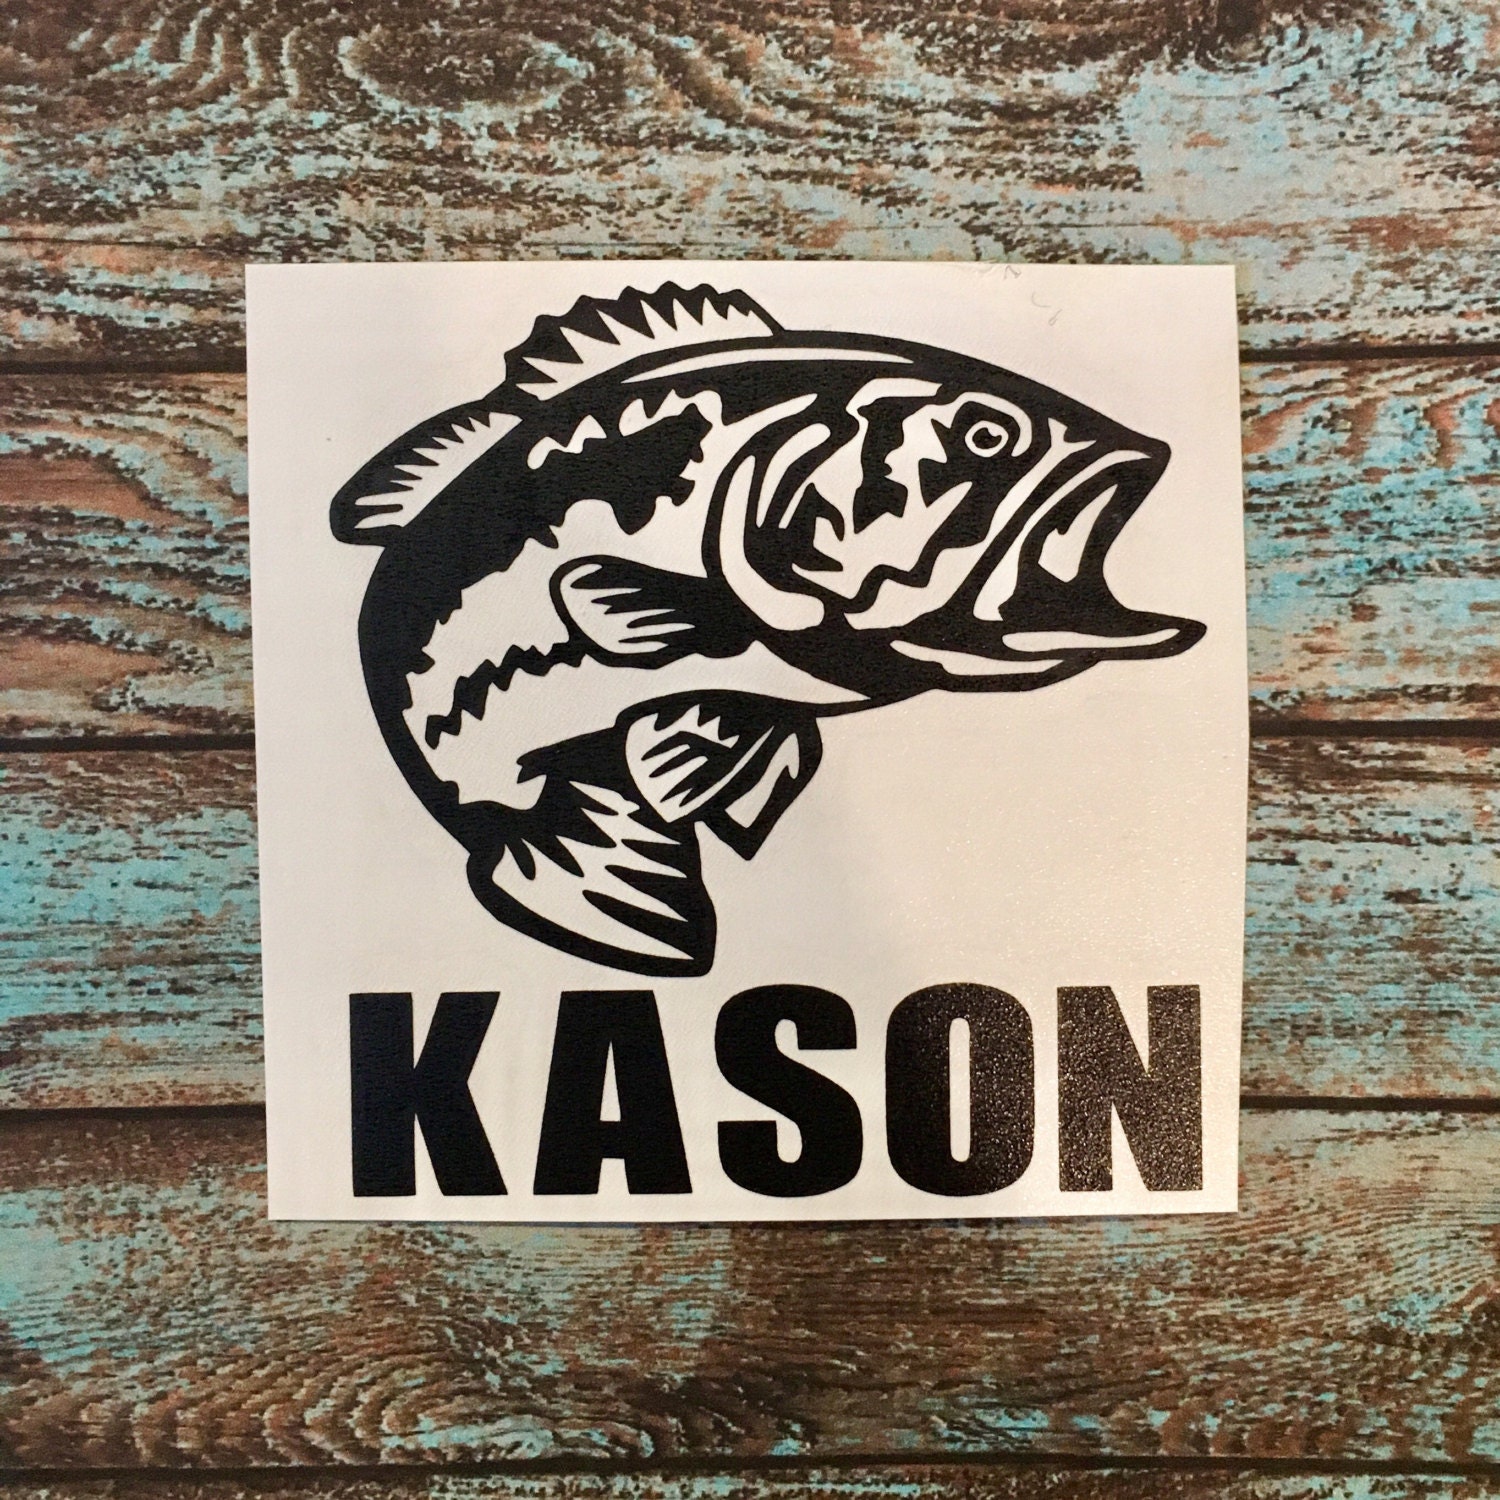 Largemouth Bass Decal Fish Decal with Name Yeti Decal